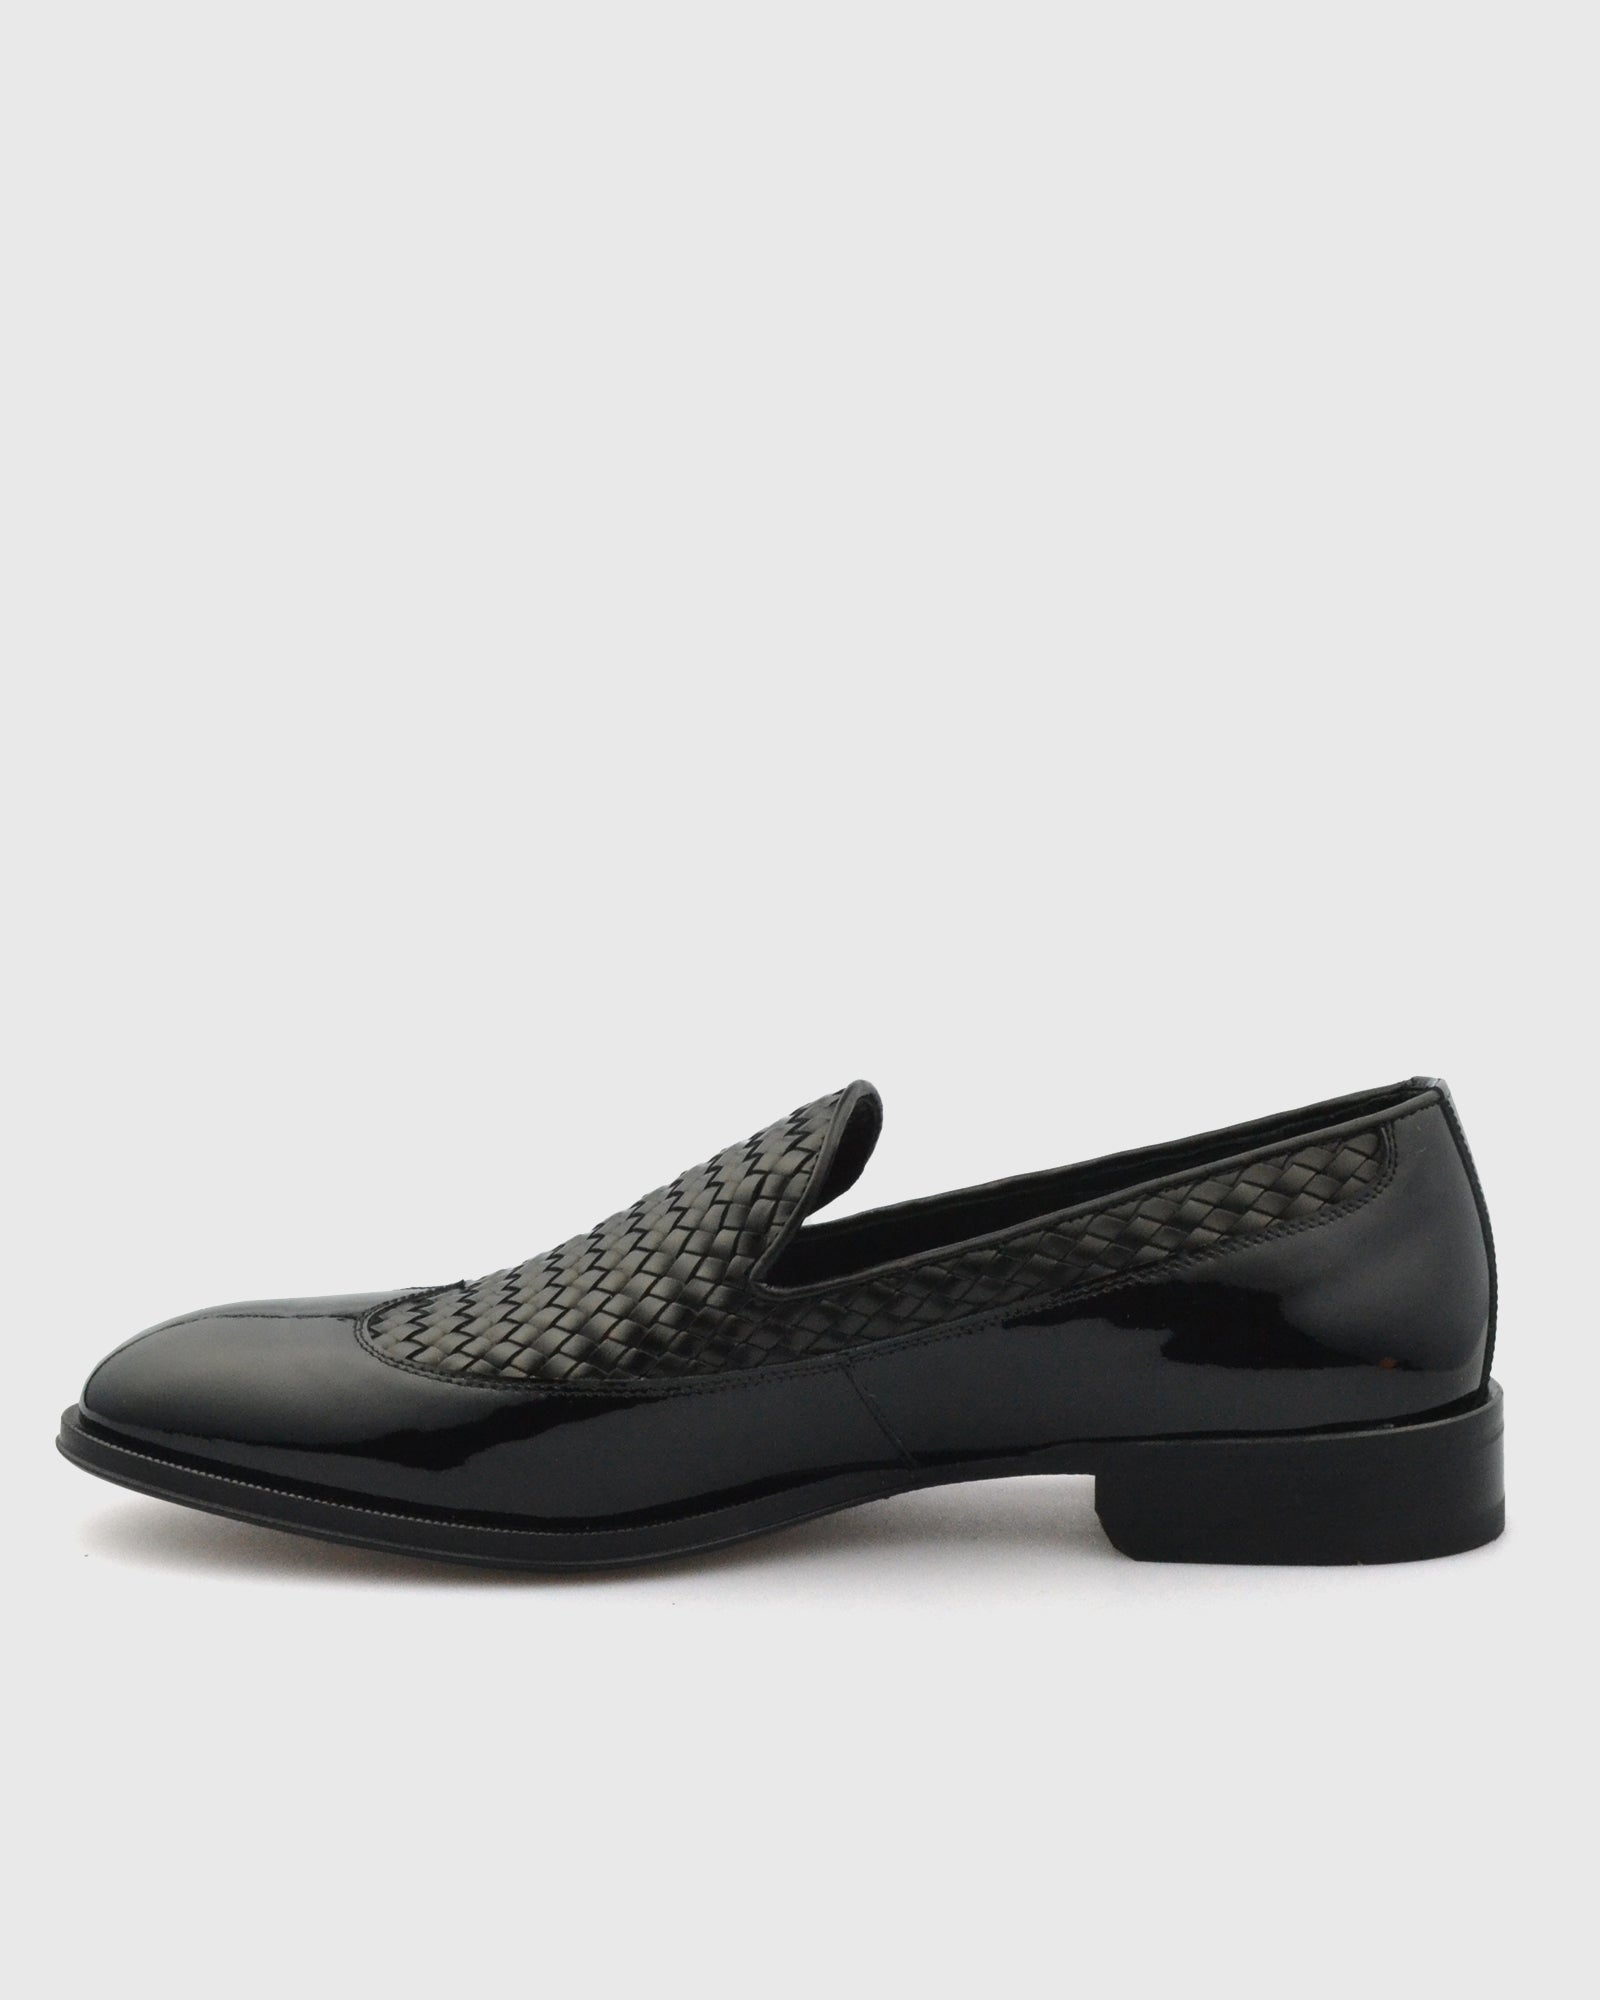 VINCENT & FRANKS VFW23LO SHINY BLACK PATENT & WOVEN LOAFER